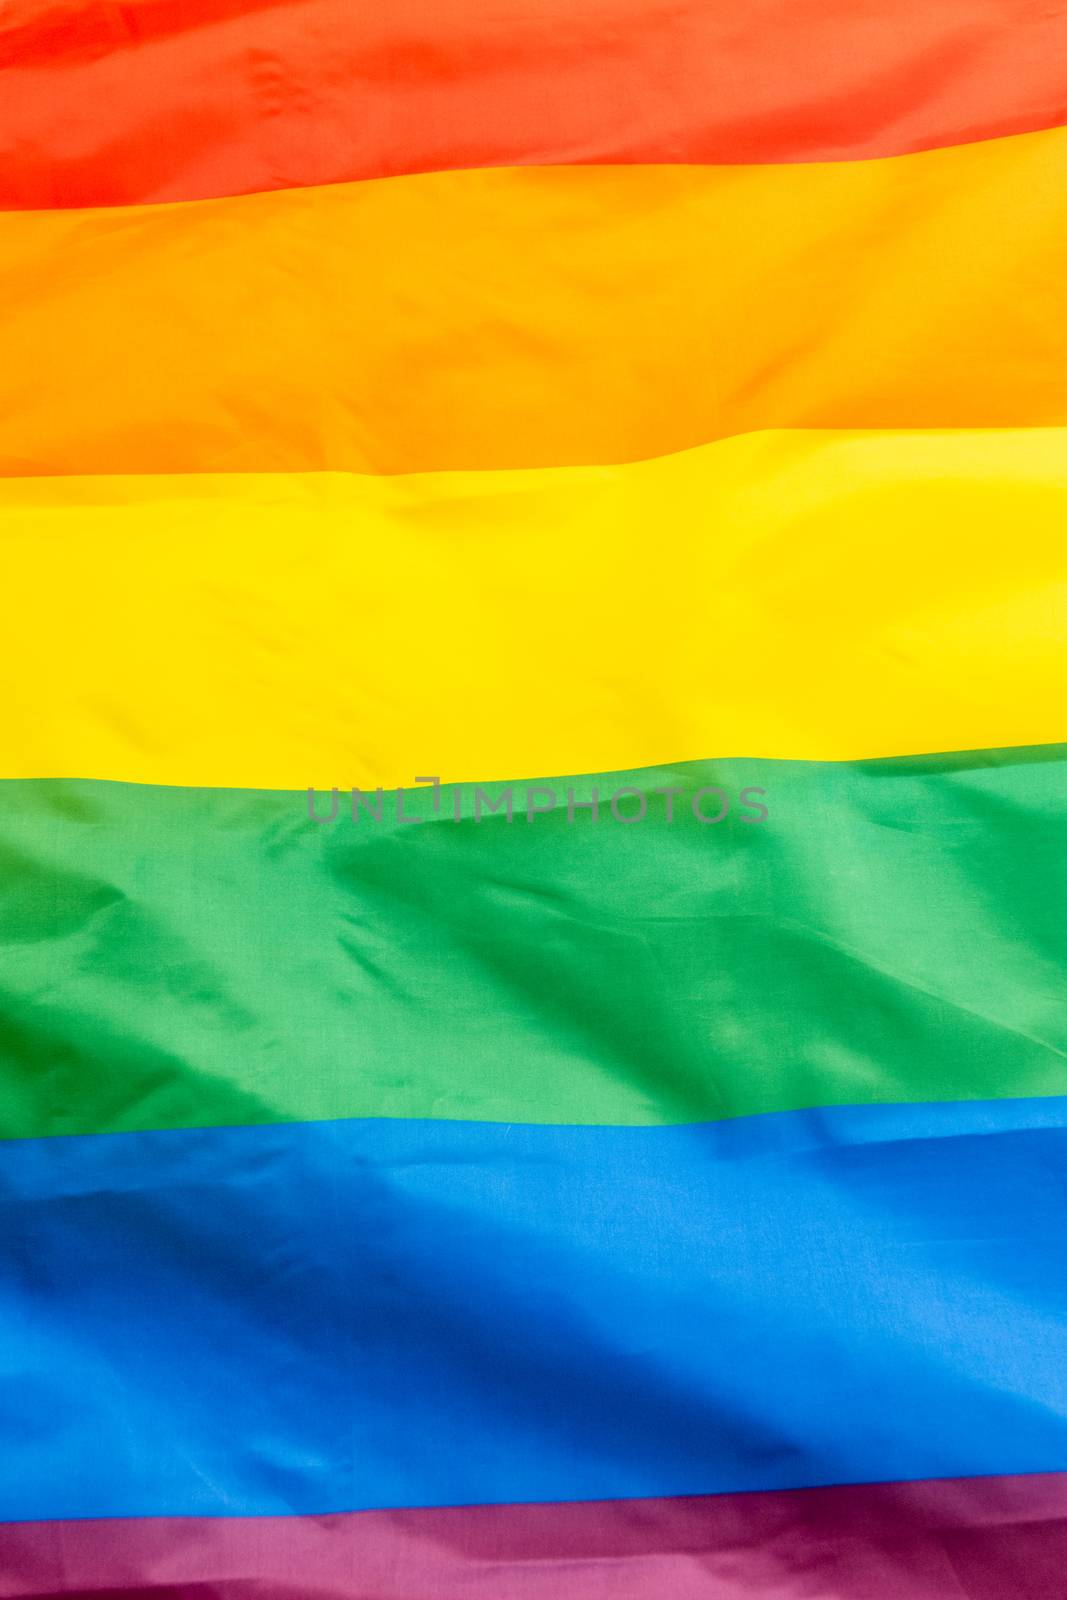 The Rainbow Flag, used as a symbol of LGBTQ pride movements by imagesbykenny